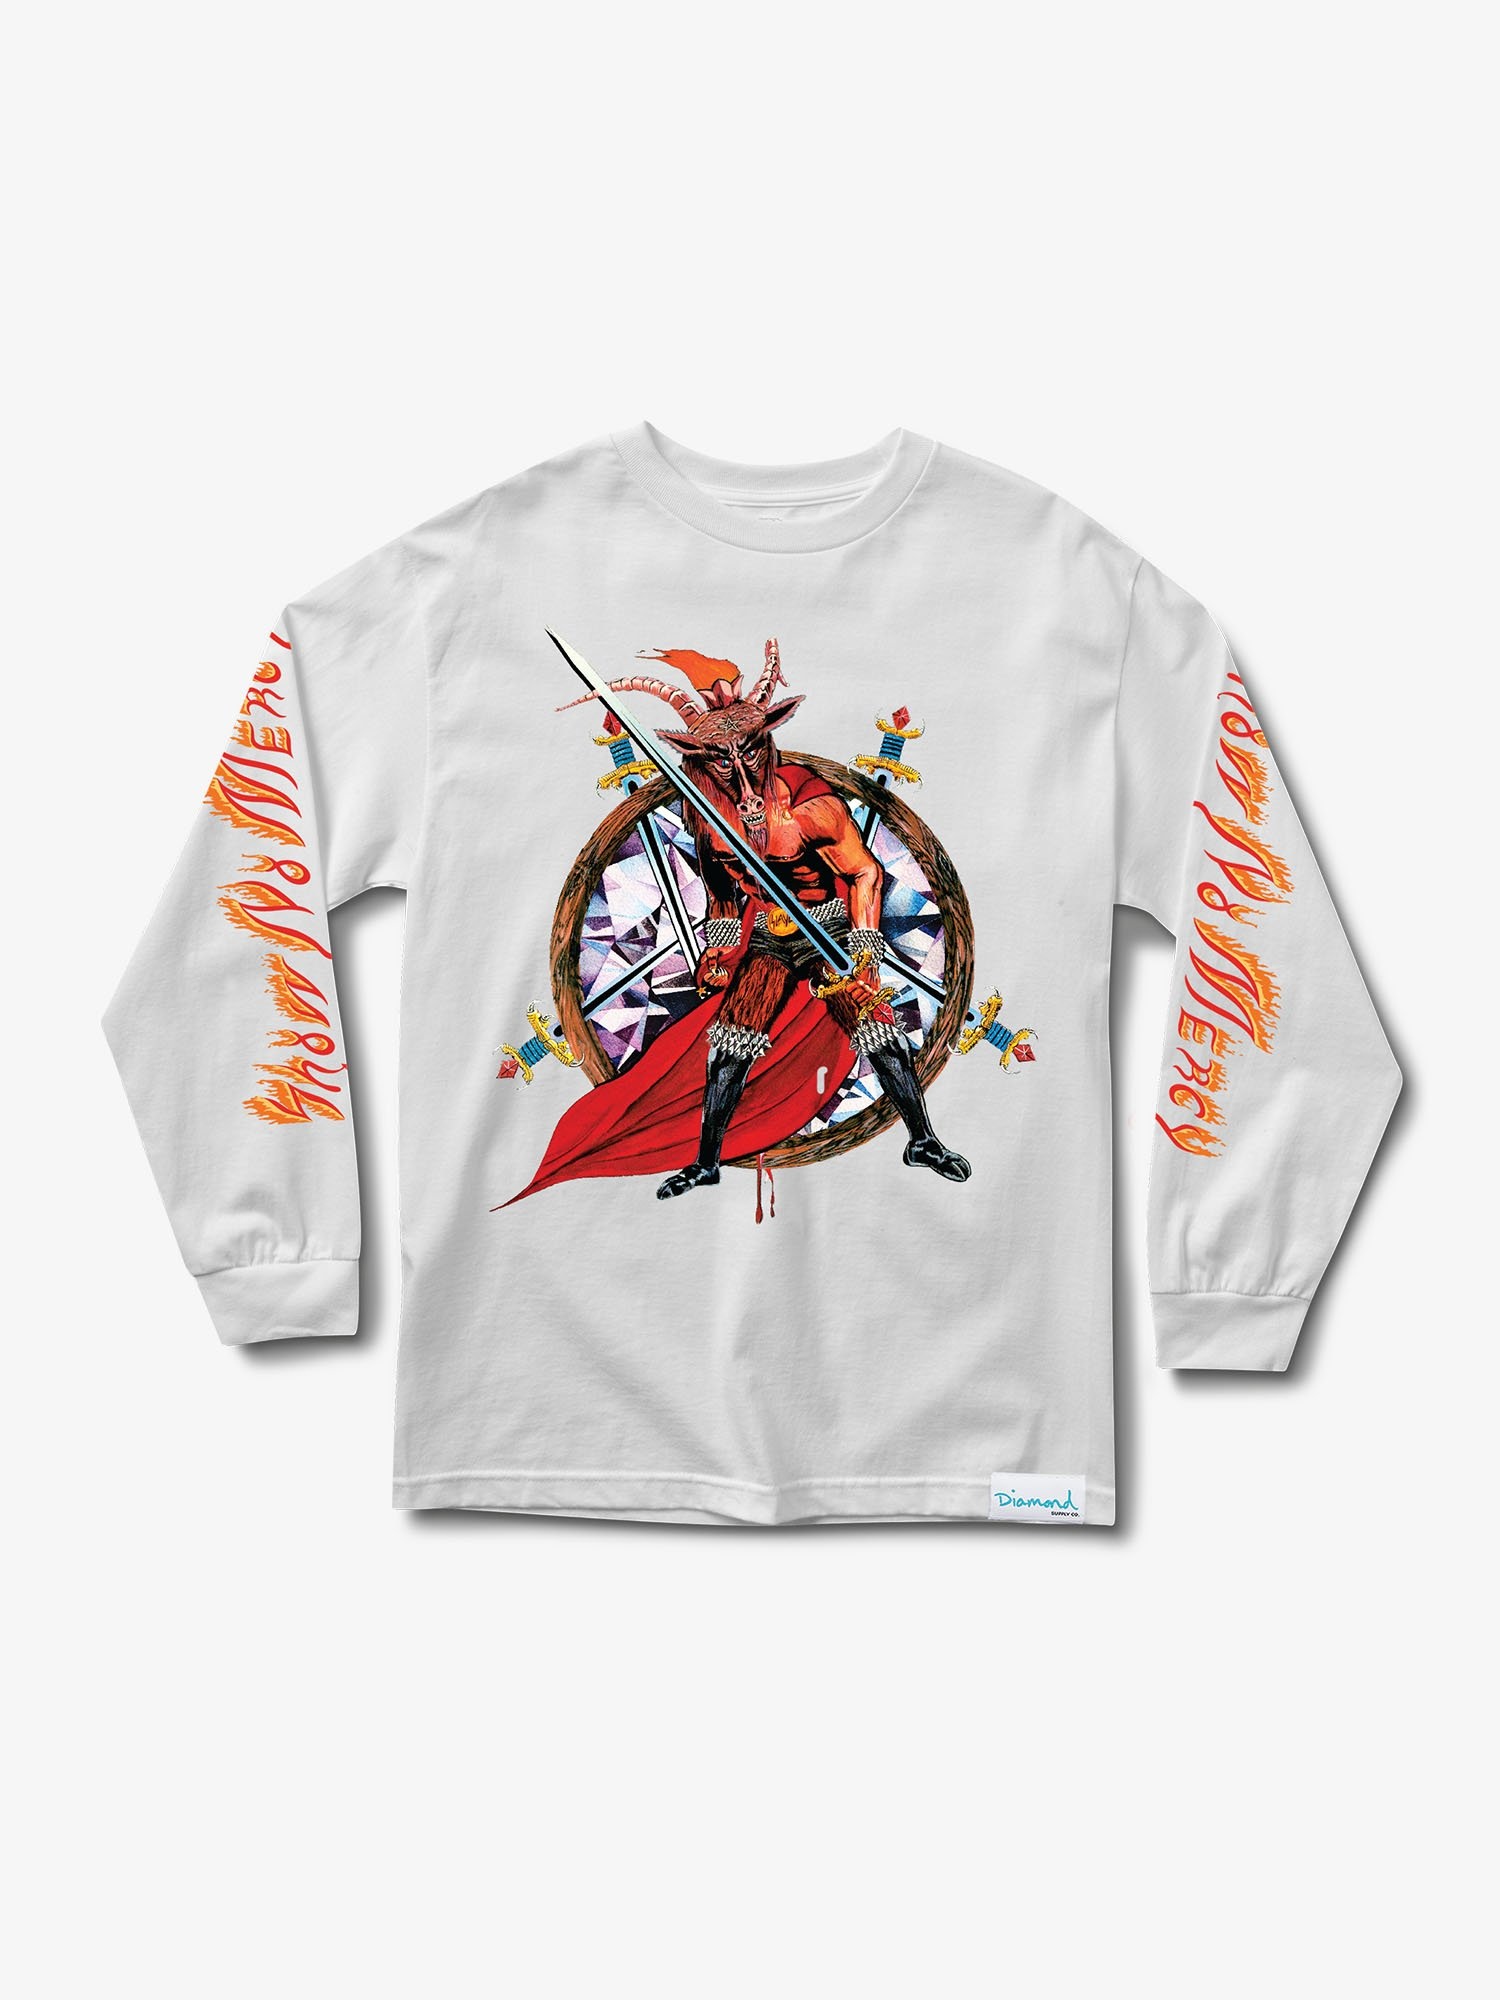 DIAMOND X SLAYER NO MERCY L/S TEE - (ALL COLORS) - KINGSWELL - Los